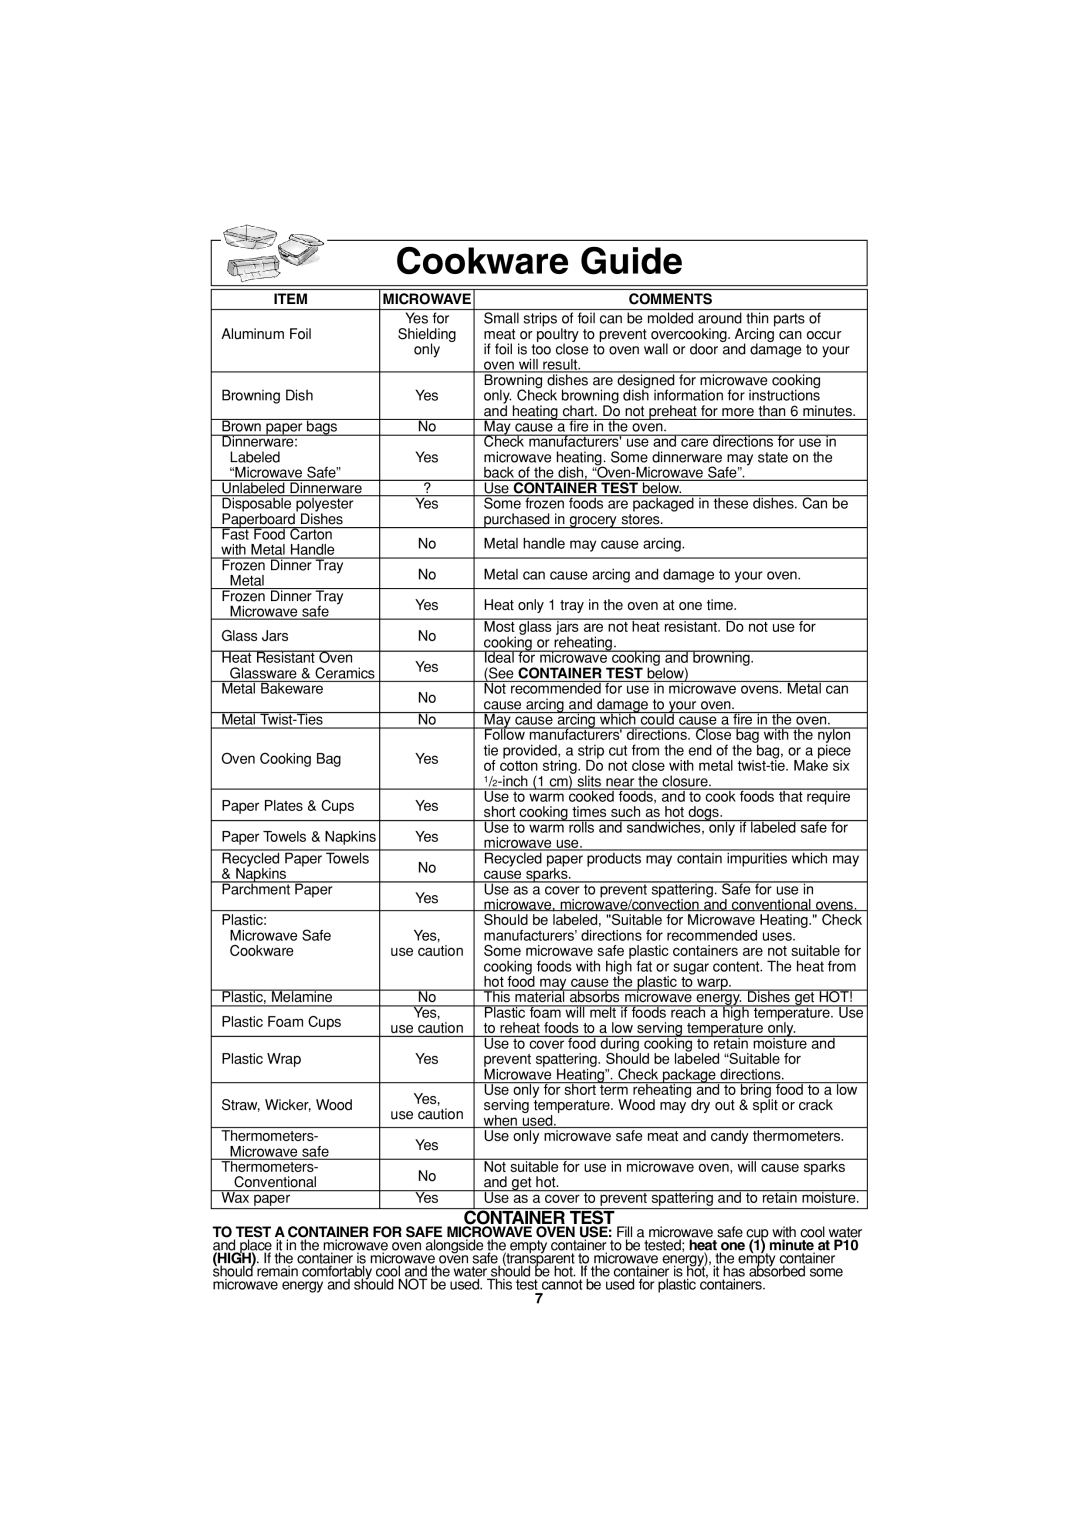 Panasonic NN-S953, NN-S753 operating instructions Cookware Guide, Container Test 